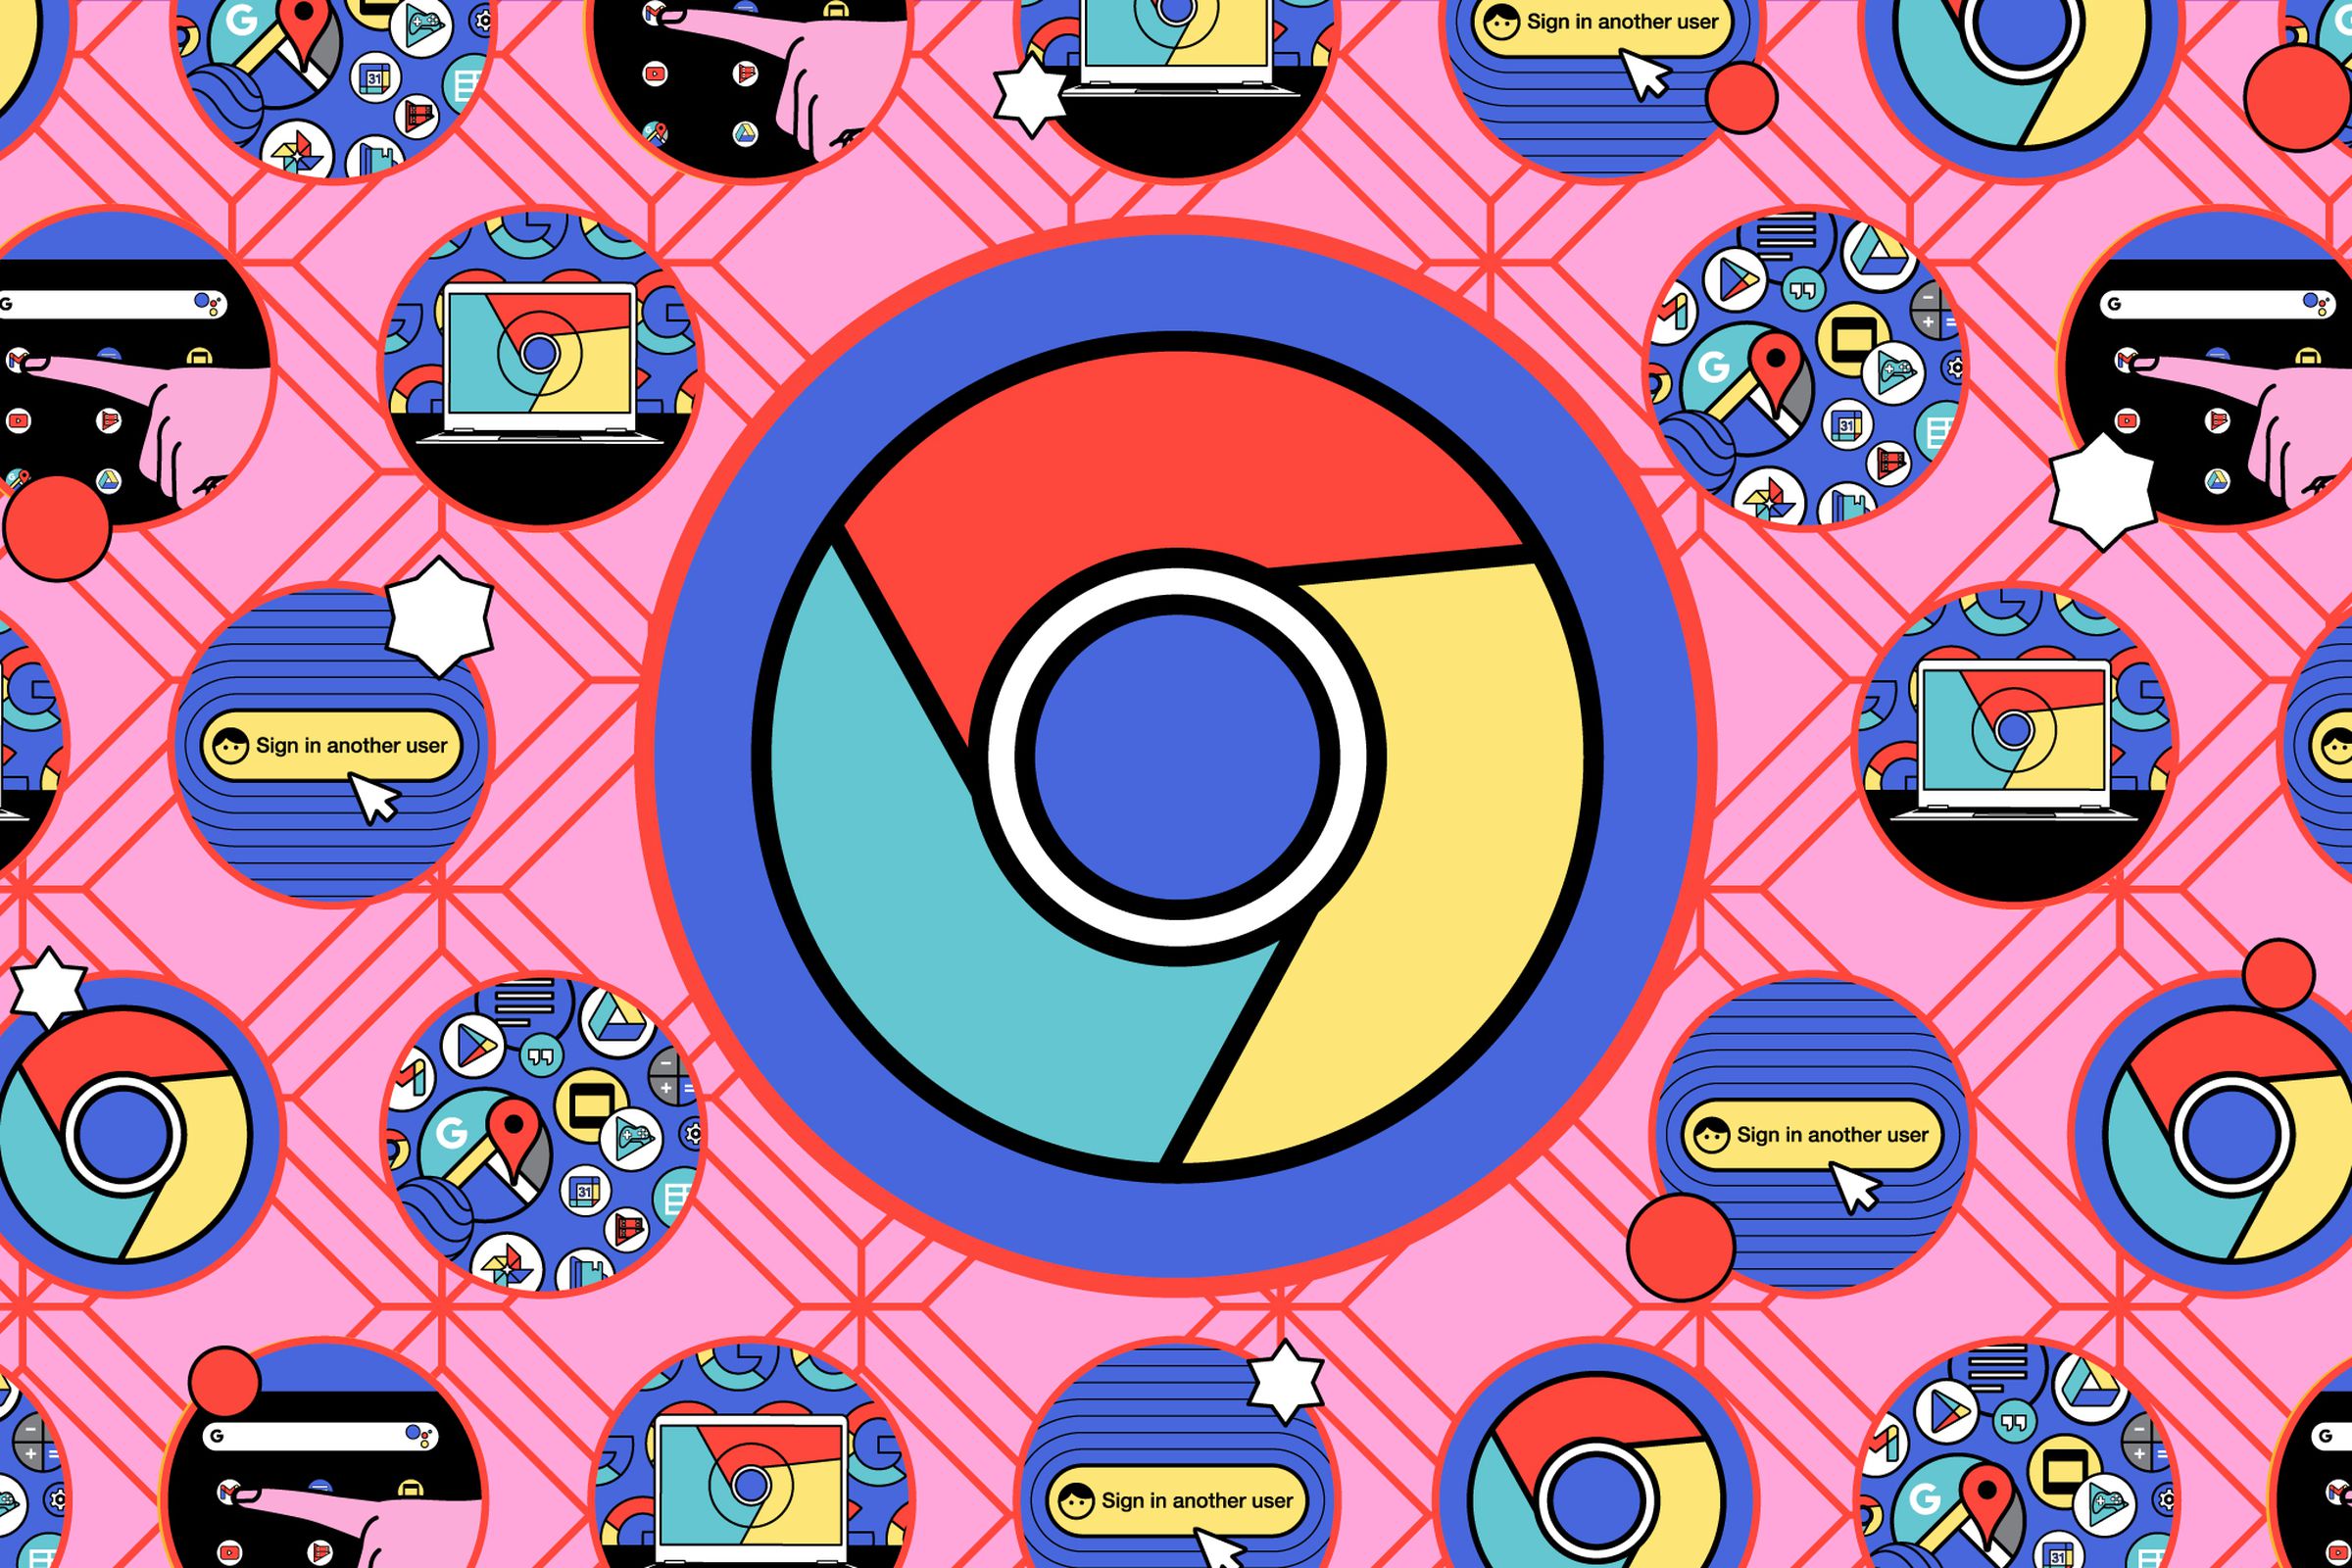 Chrome logo surrounded by small illustrations against a pink background.